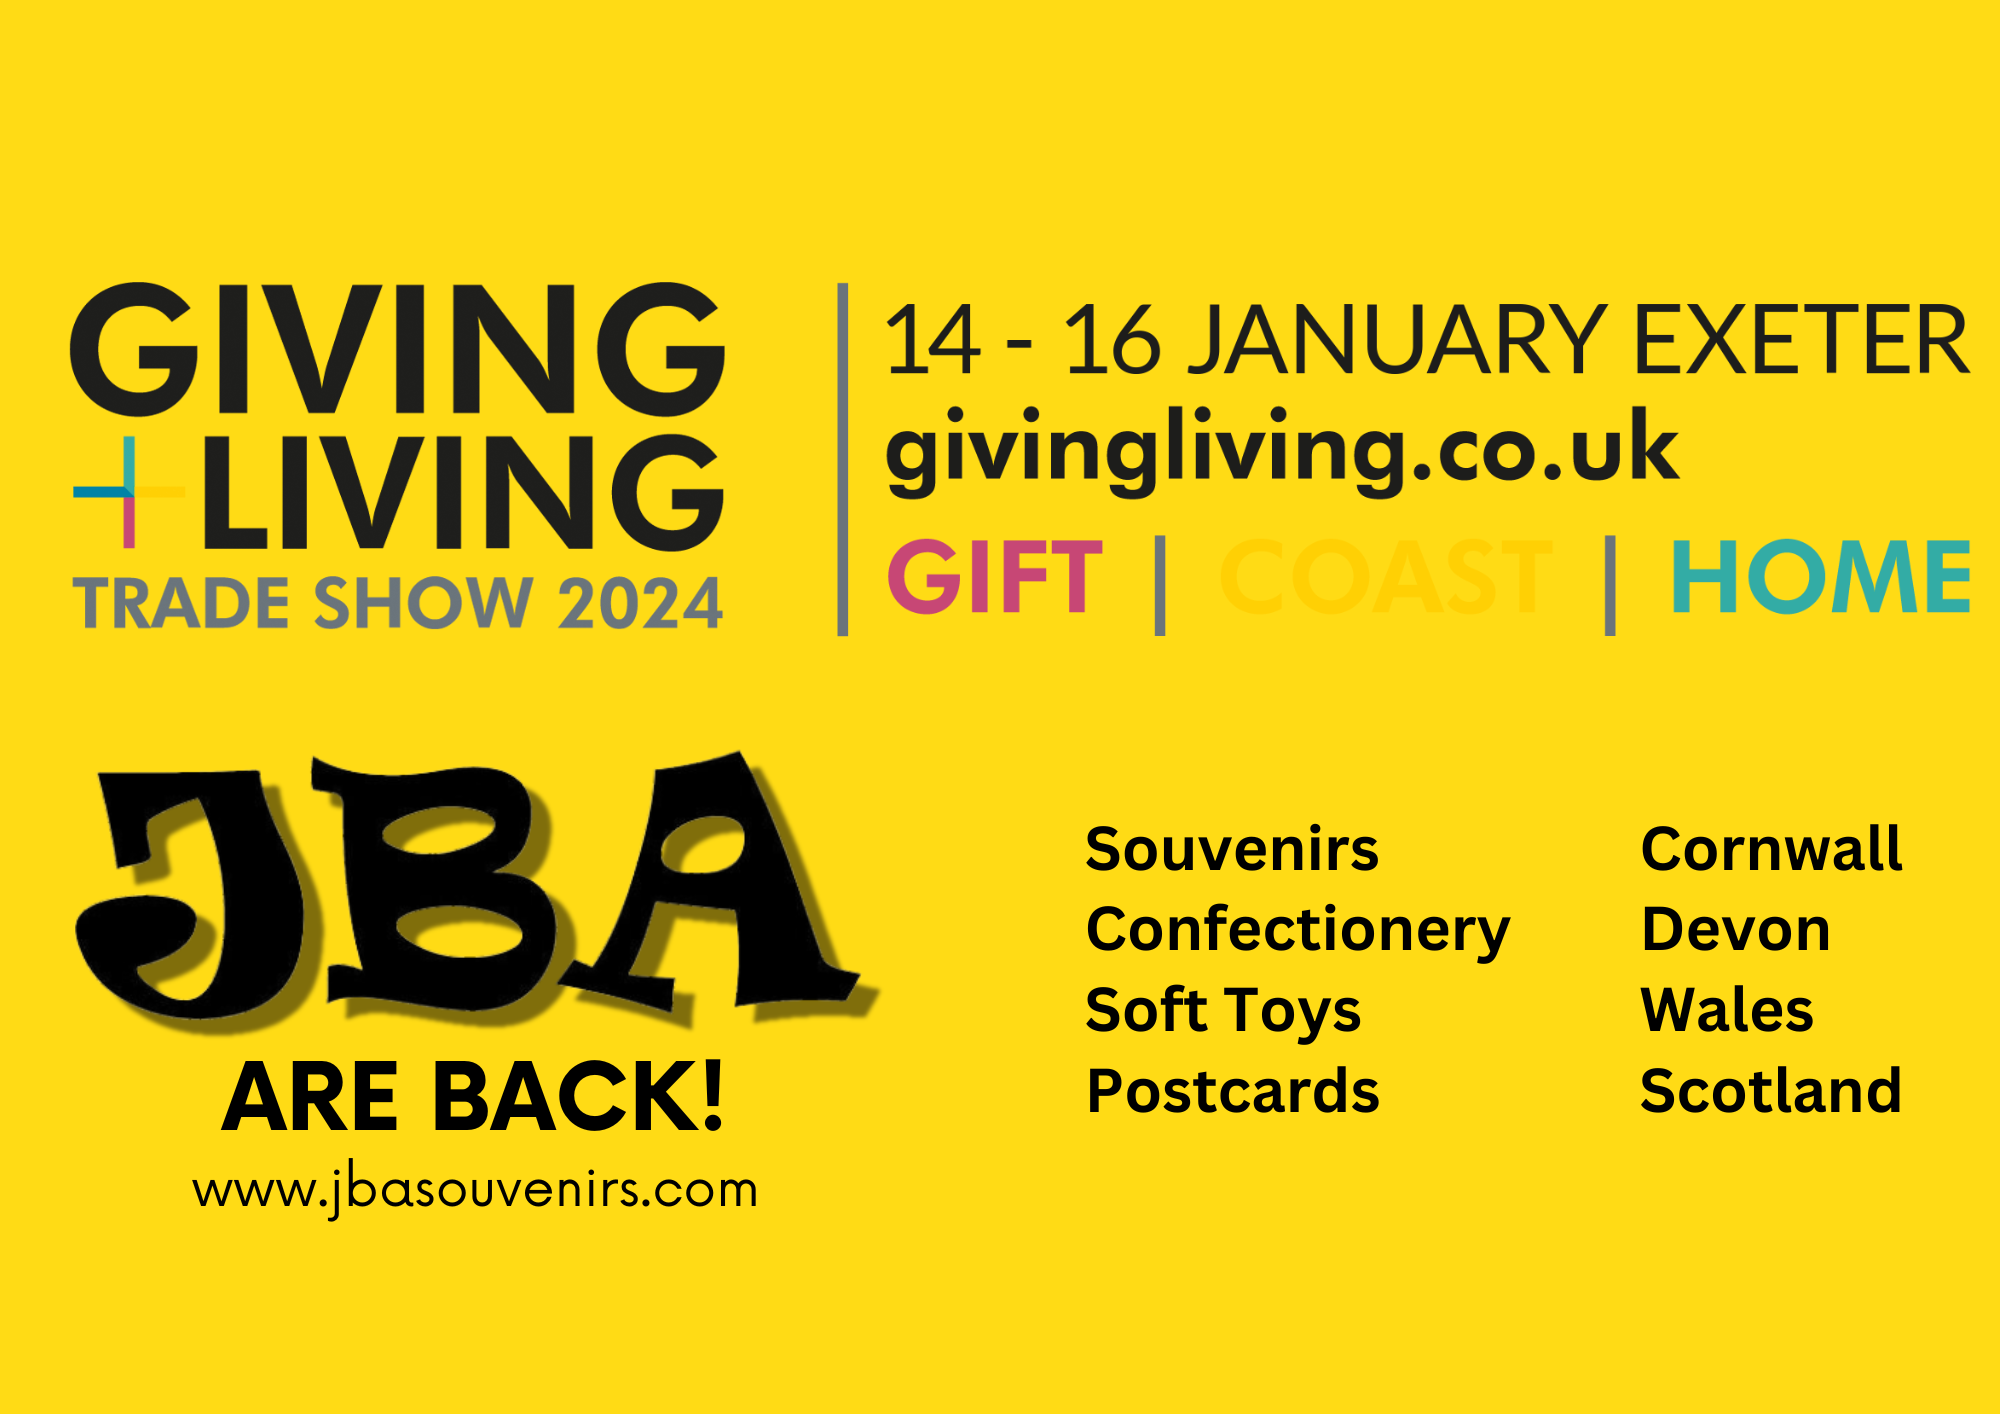 Giving and Living Trade Show 2024